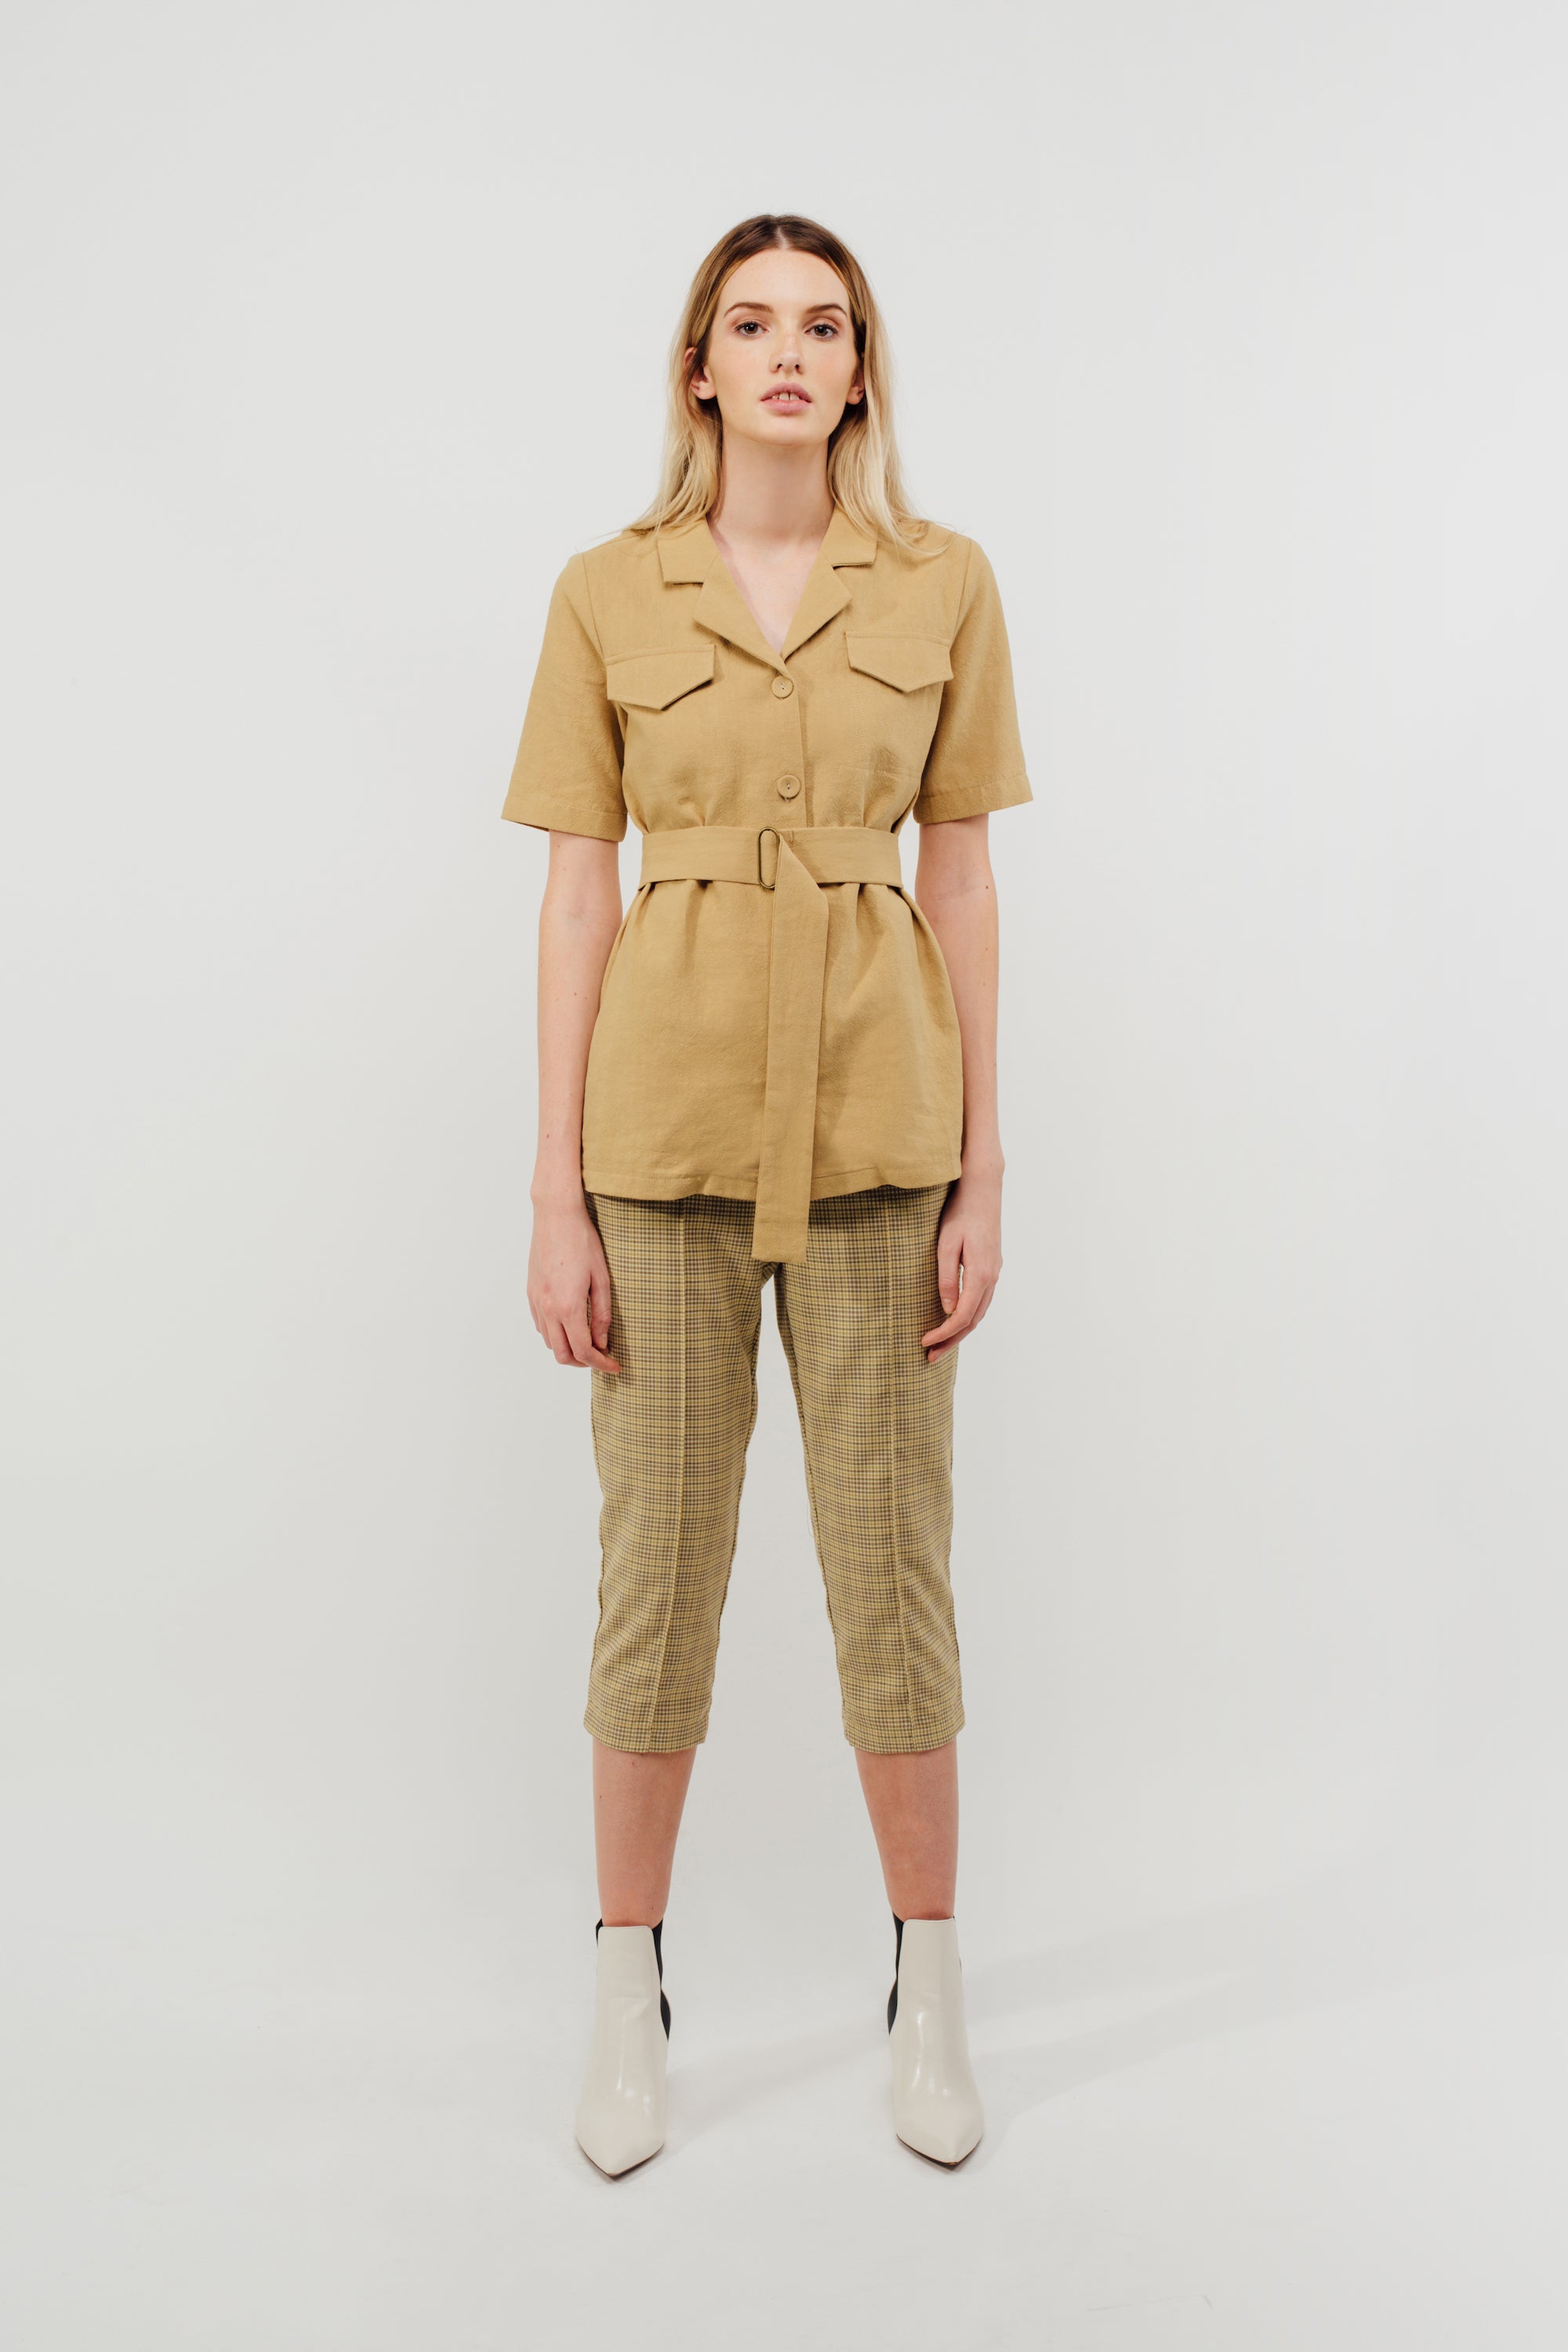 Camp Shirt With Sash In Mustard